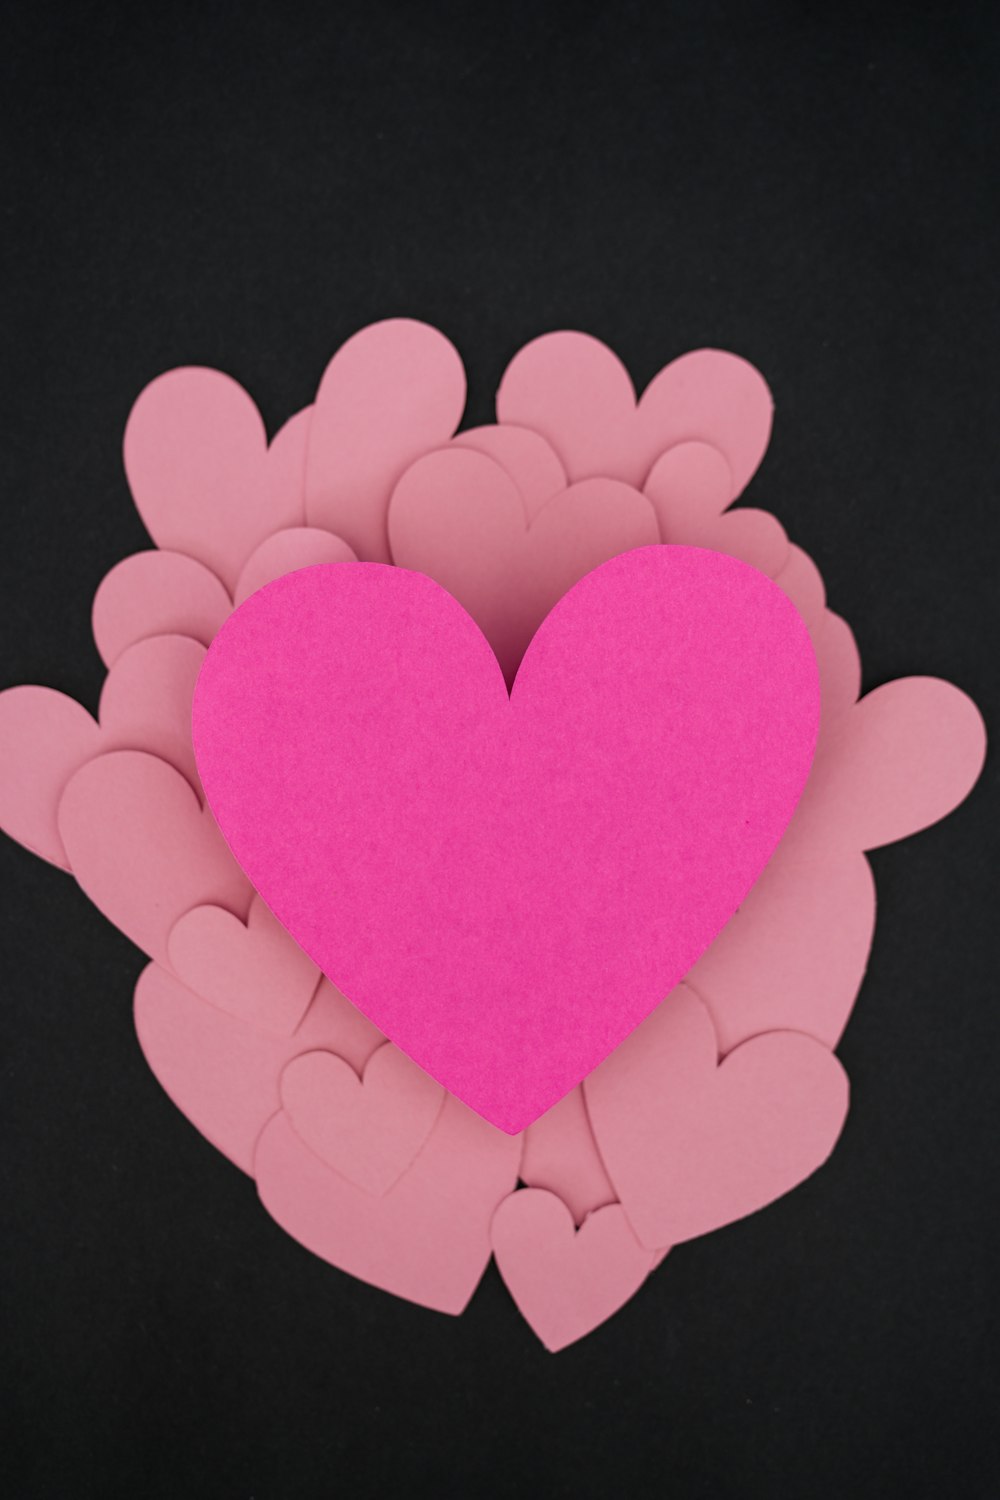 a pink heart surrounded by pink hearts on a black background